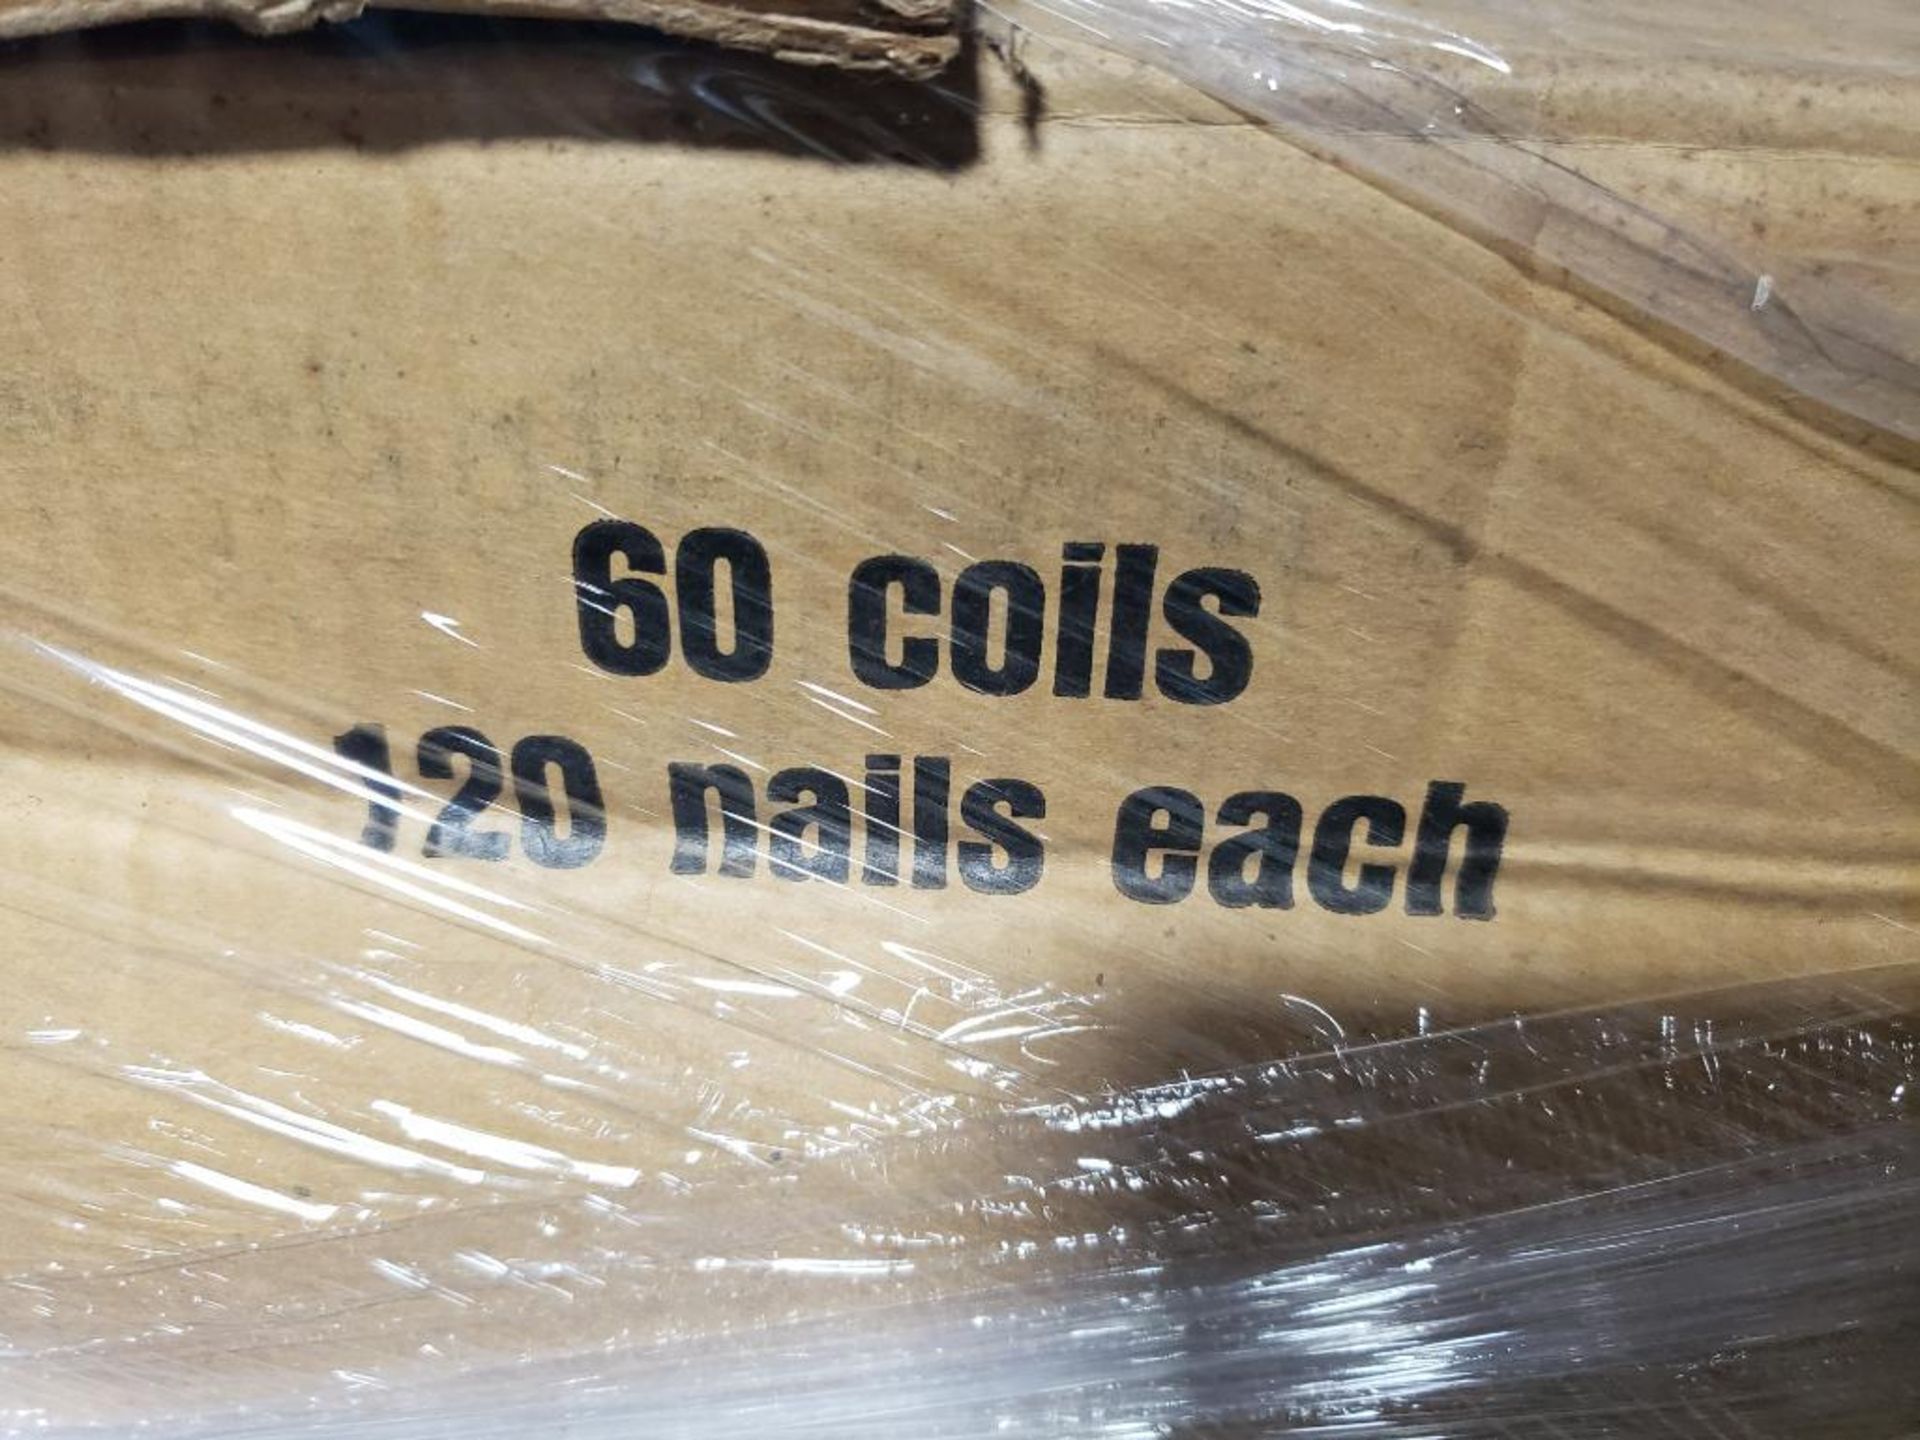 Pallet of Bostich coil roofing nails. - Image 3 of 4